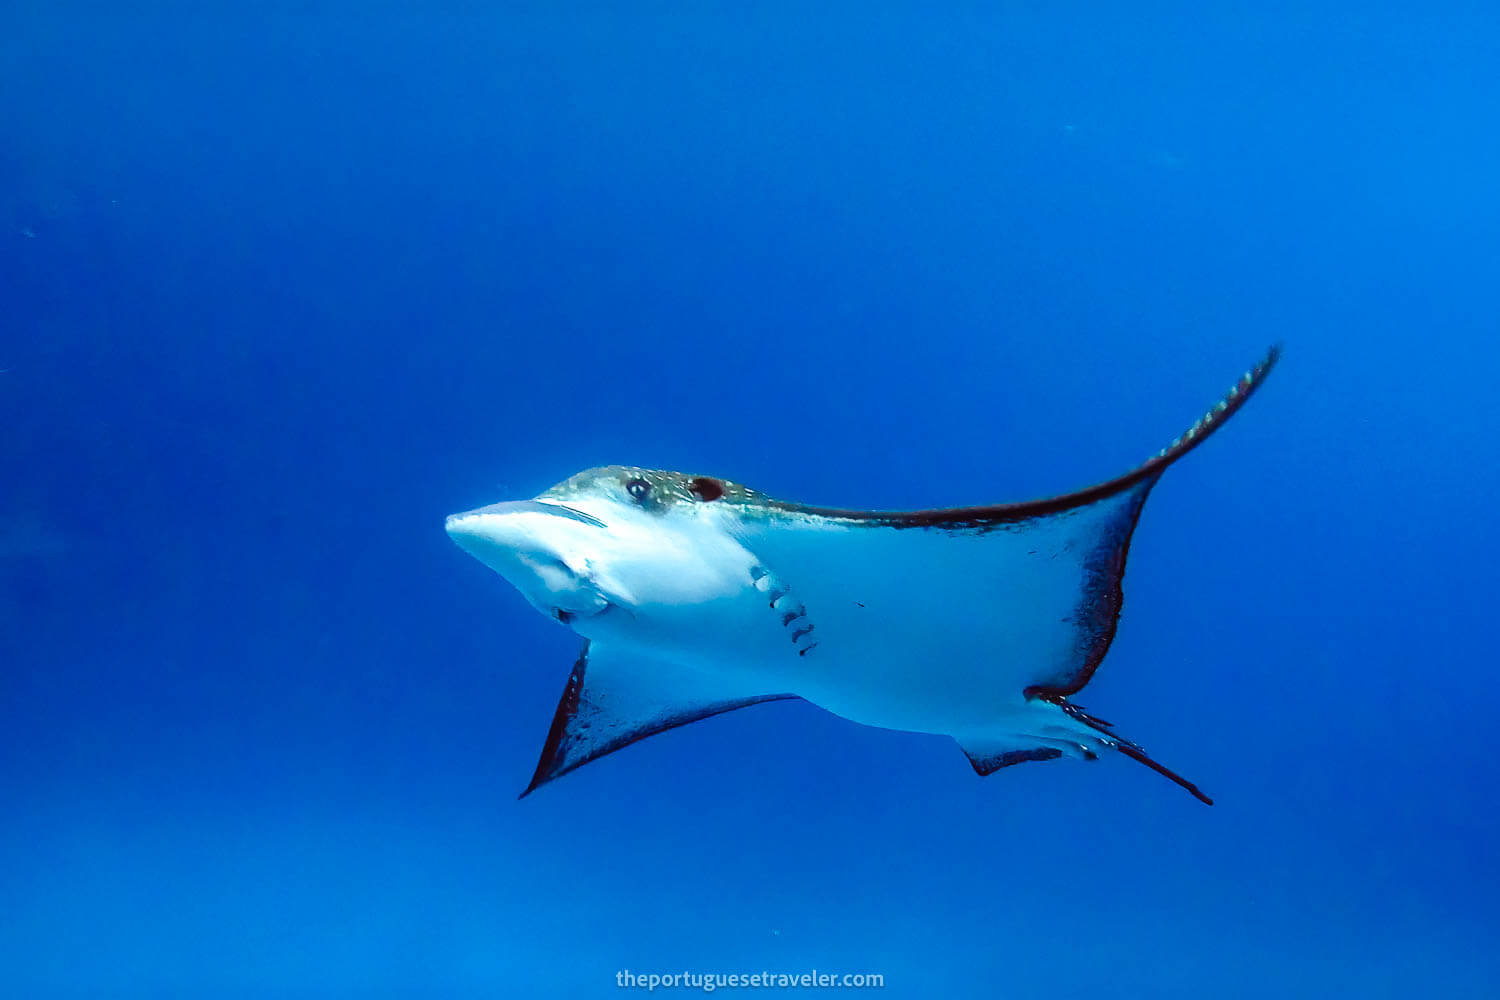 The first eagle ray that passed by